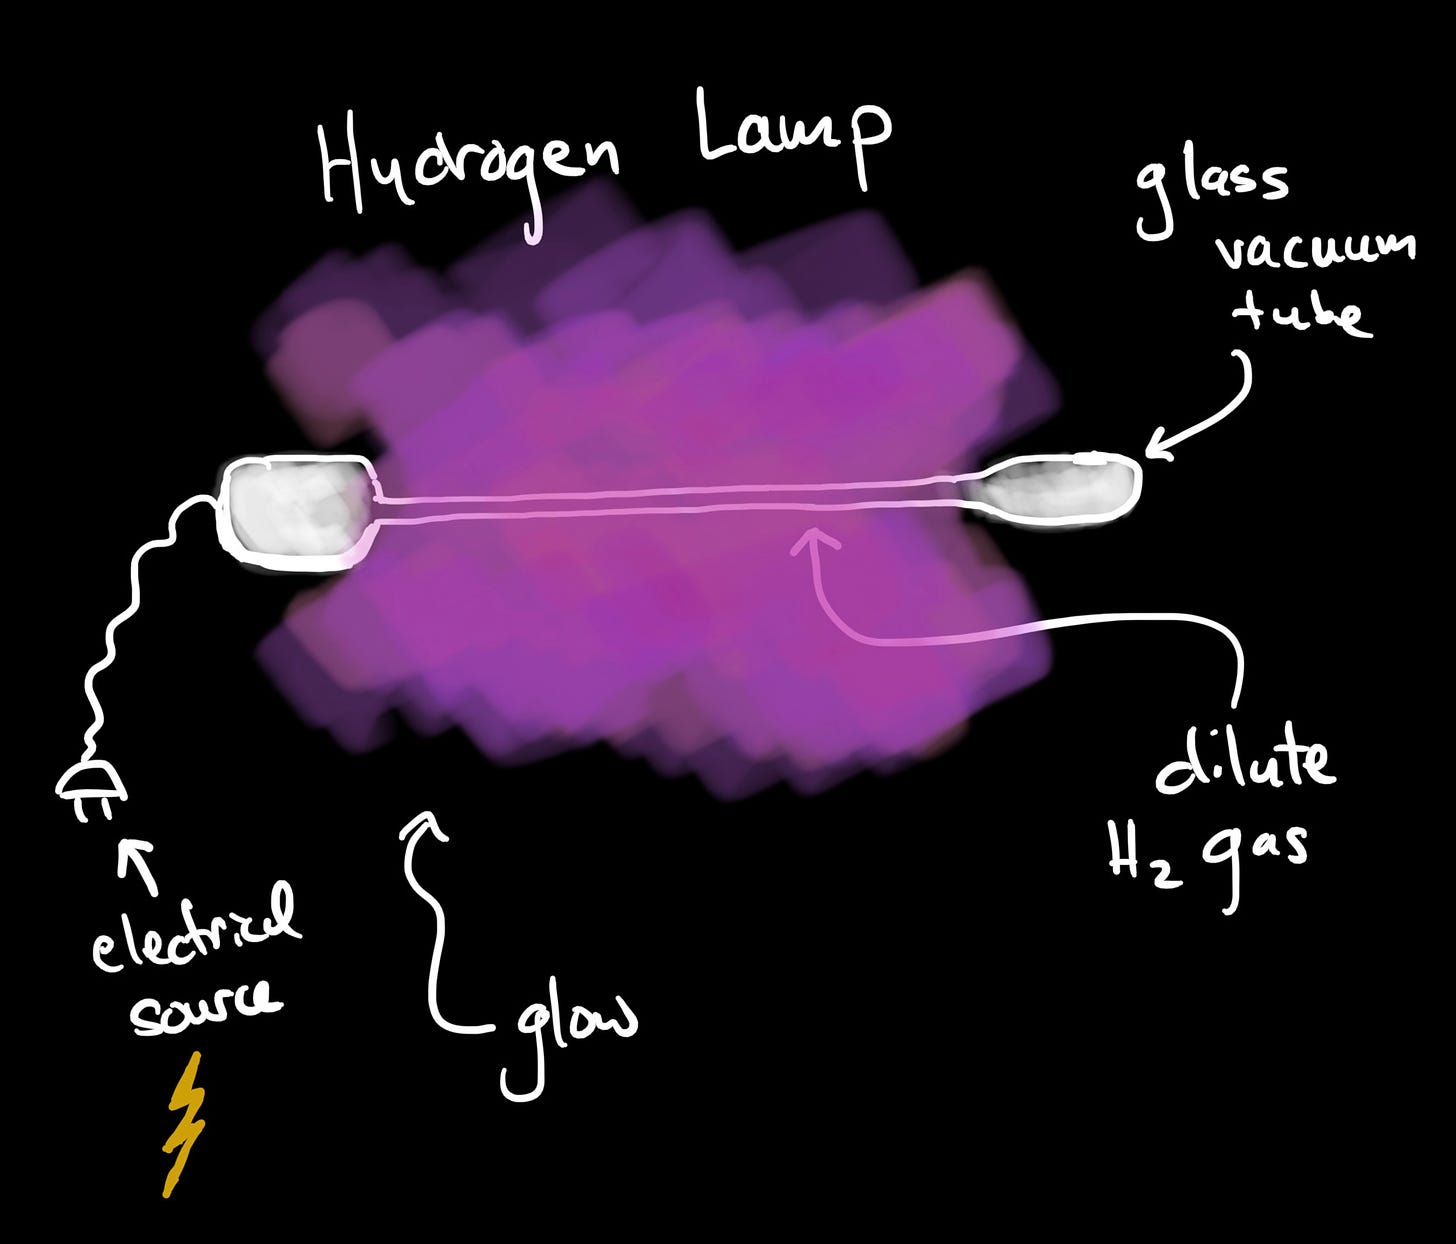 A hydrogen gas lamp is shown, a narrow tube with a dilute H2 gas is attached to an electric source and glows purple.